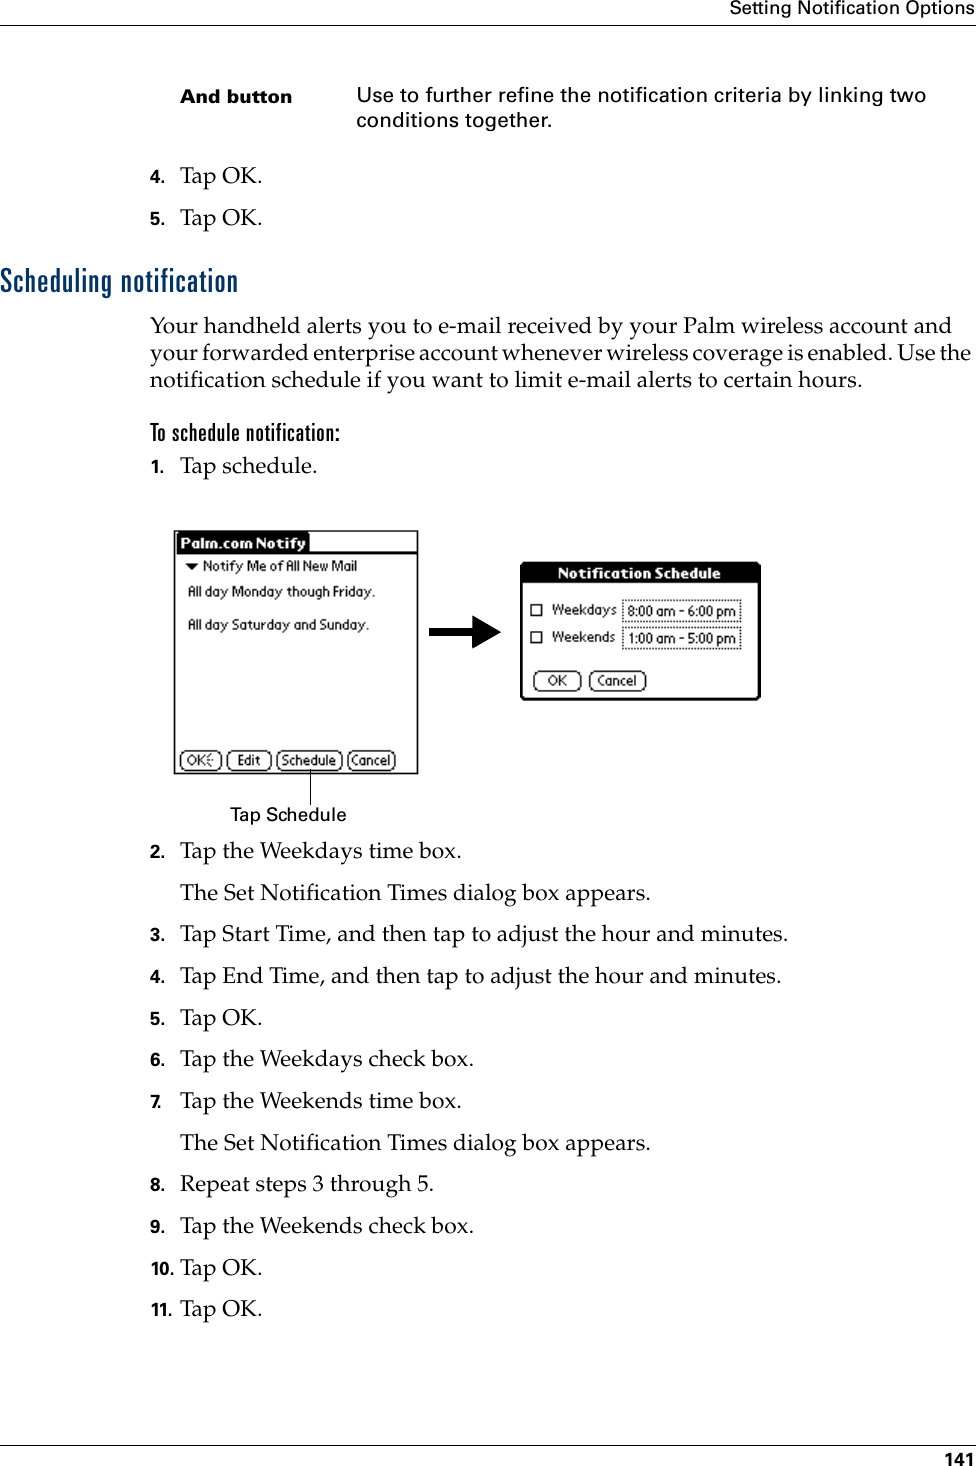 Setting Notification Options1414. Tap OK.5. Tap OK.Scheduling notificationYour handheld alerts you to e-mail received by your Palm wireless account and your forwarded enterprise account whenever wireless coverage is enabled. Use the notification schedule if you want to limit e-mail alerts to certain hours.To schedule notification:1. Tap schedule. 2. Tap the Weekdays time box.The Set Notification Times dialog box appears.3. Tap Start Time, and then tap to adjust the hour and minutes.4. Tap End Time, and then tap to adjust the hour and minutes.5. Tap OK.6. Tap the Weekdays check box.7. Tap the Weekends time box.The Set Notification Times dialog box appears.8. Repeat steps 3 through 5.9. Tap the Weekends check box.10. Tap O K .11. Ta p OK.And button Use to further refine the notification criteria by linking two conditions together.Tap Schedule